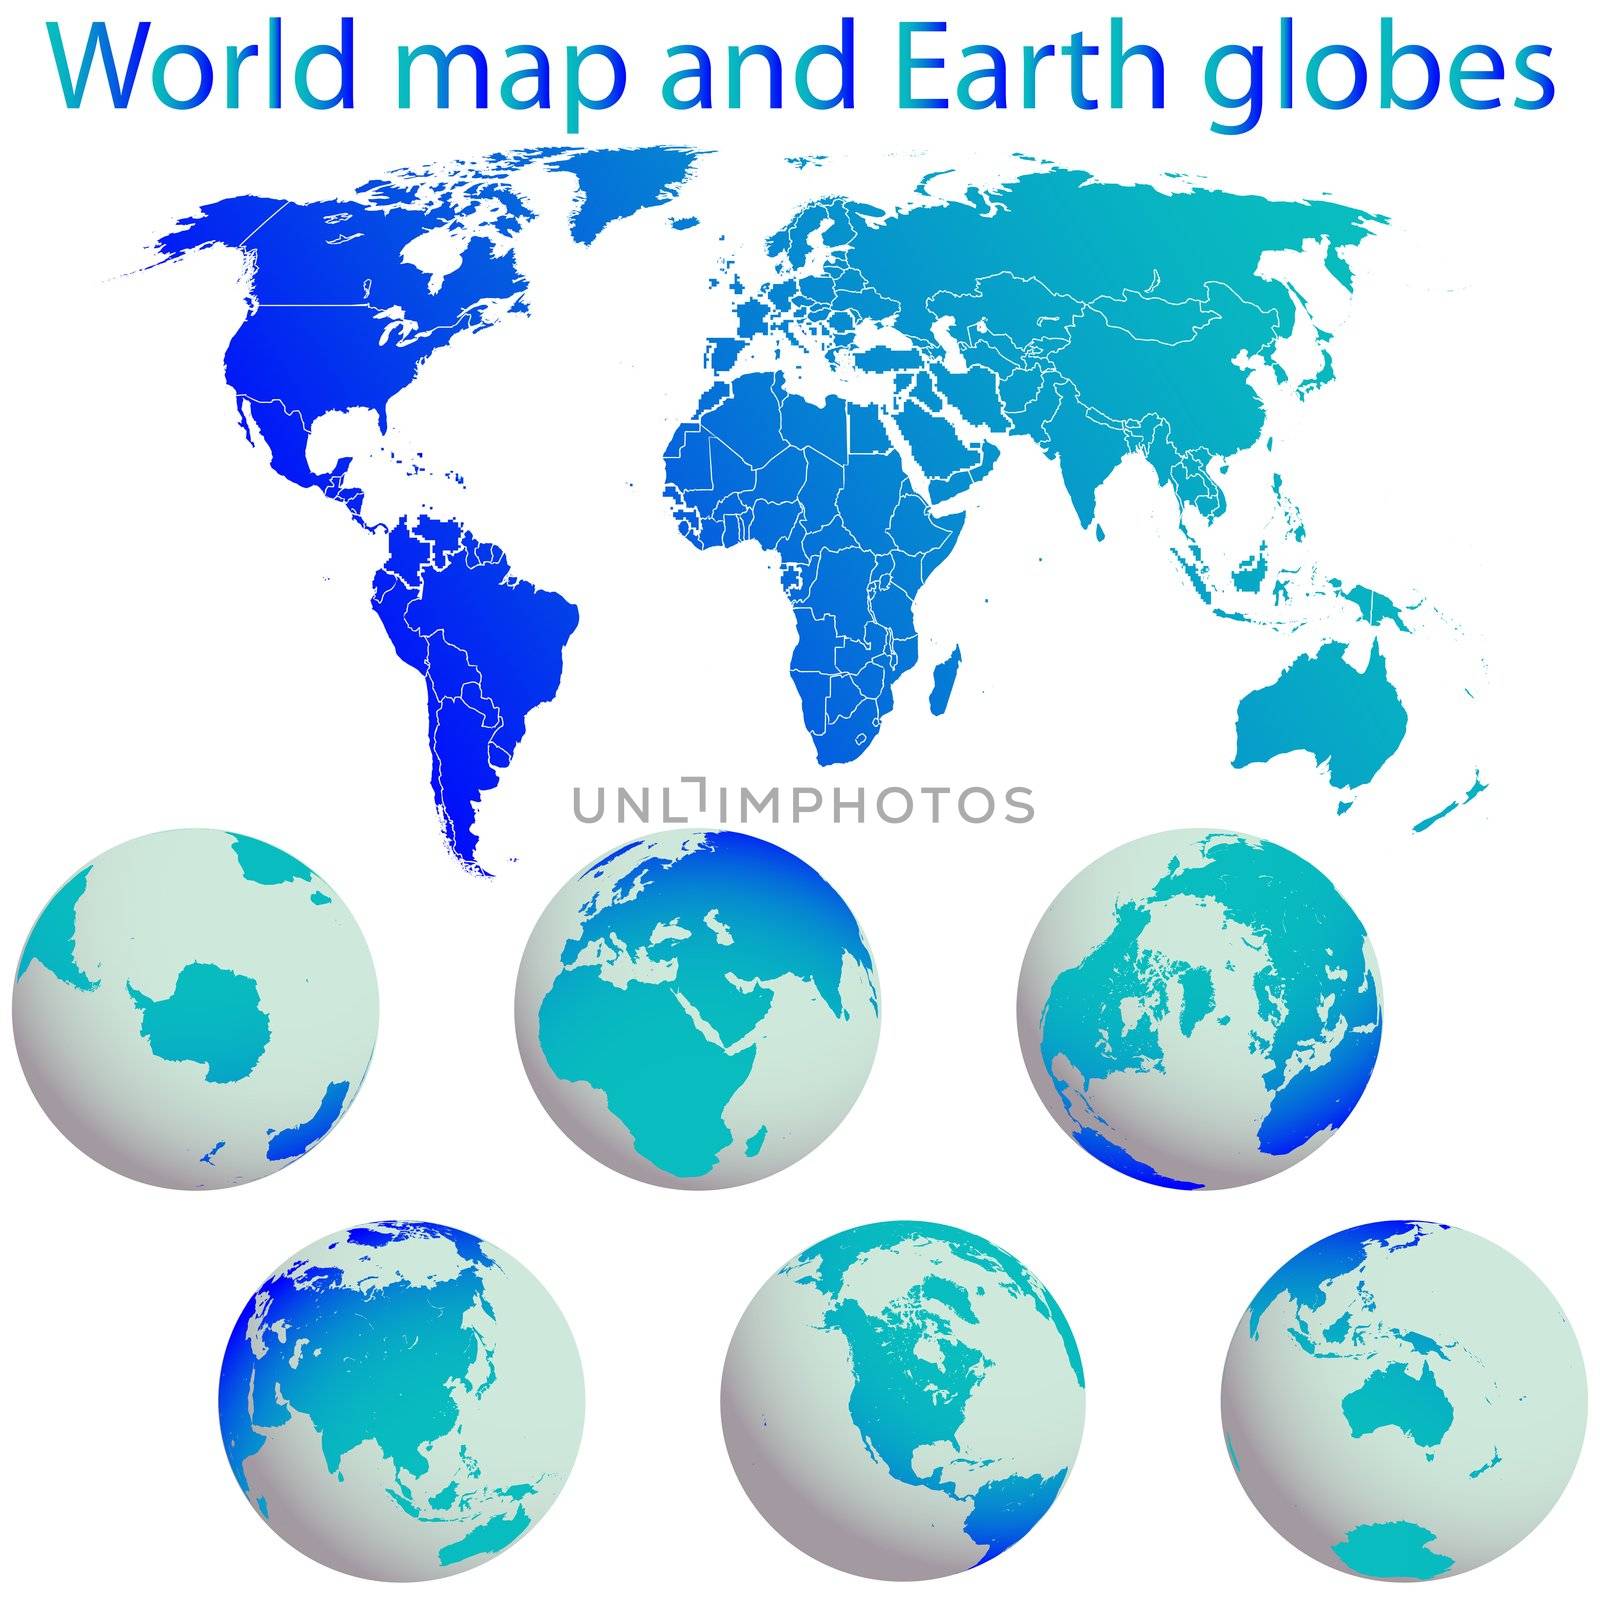 world map and earth globes against white background, abstract vector art illustration